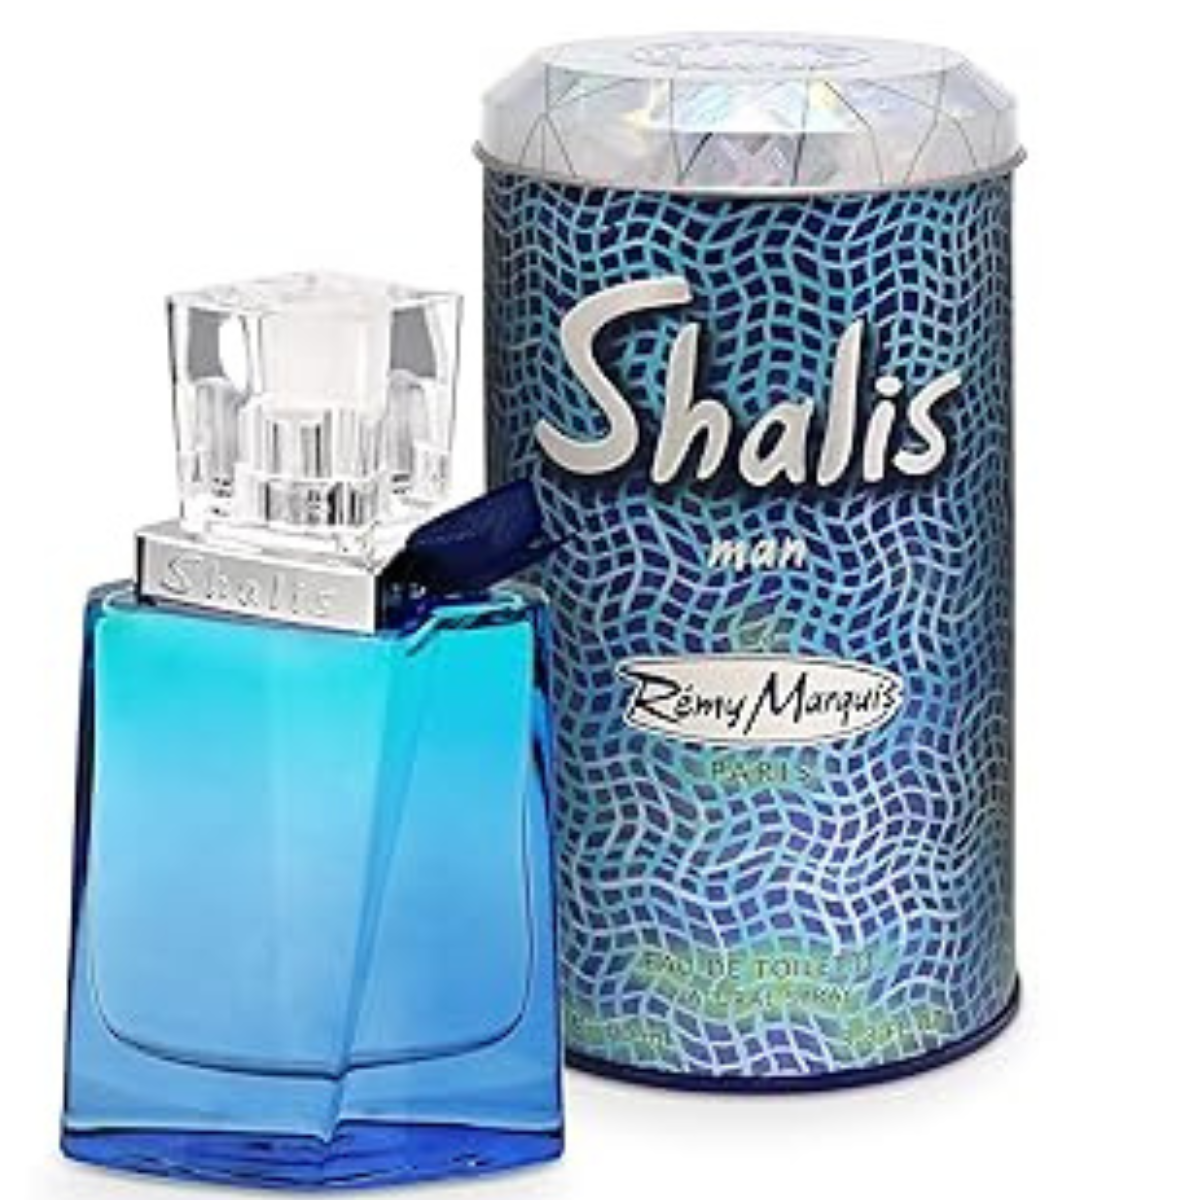 Remy Marquis Shalis 100 Ml For Men Perfume